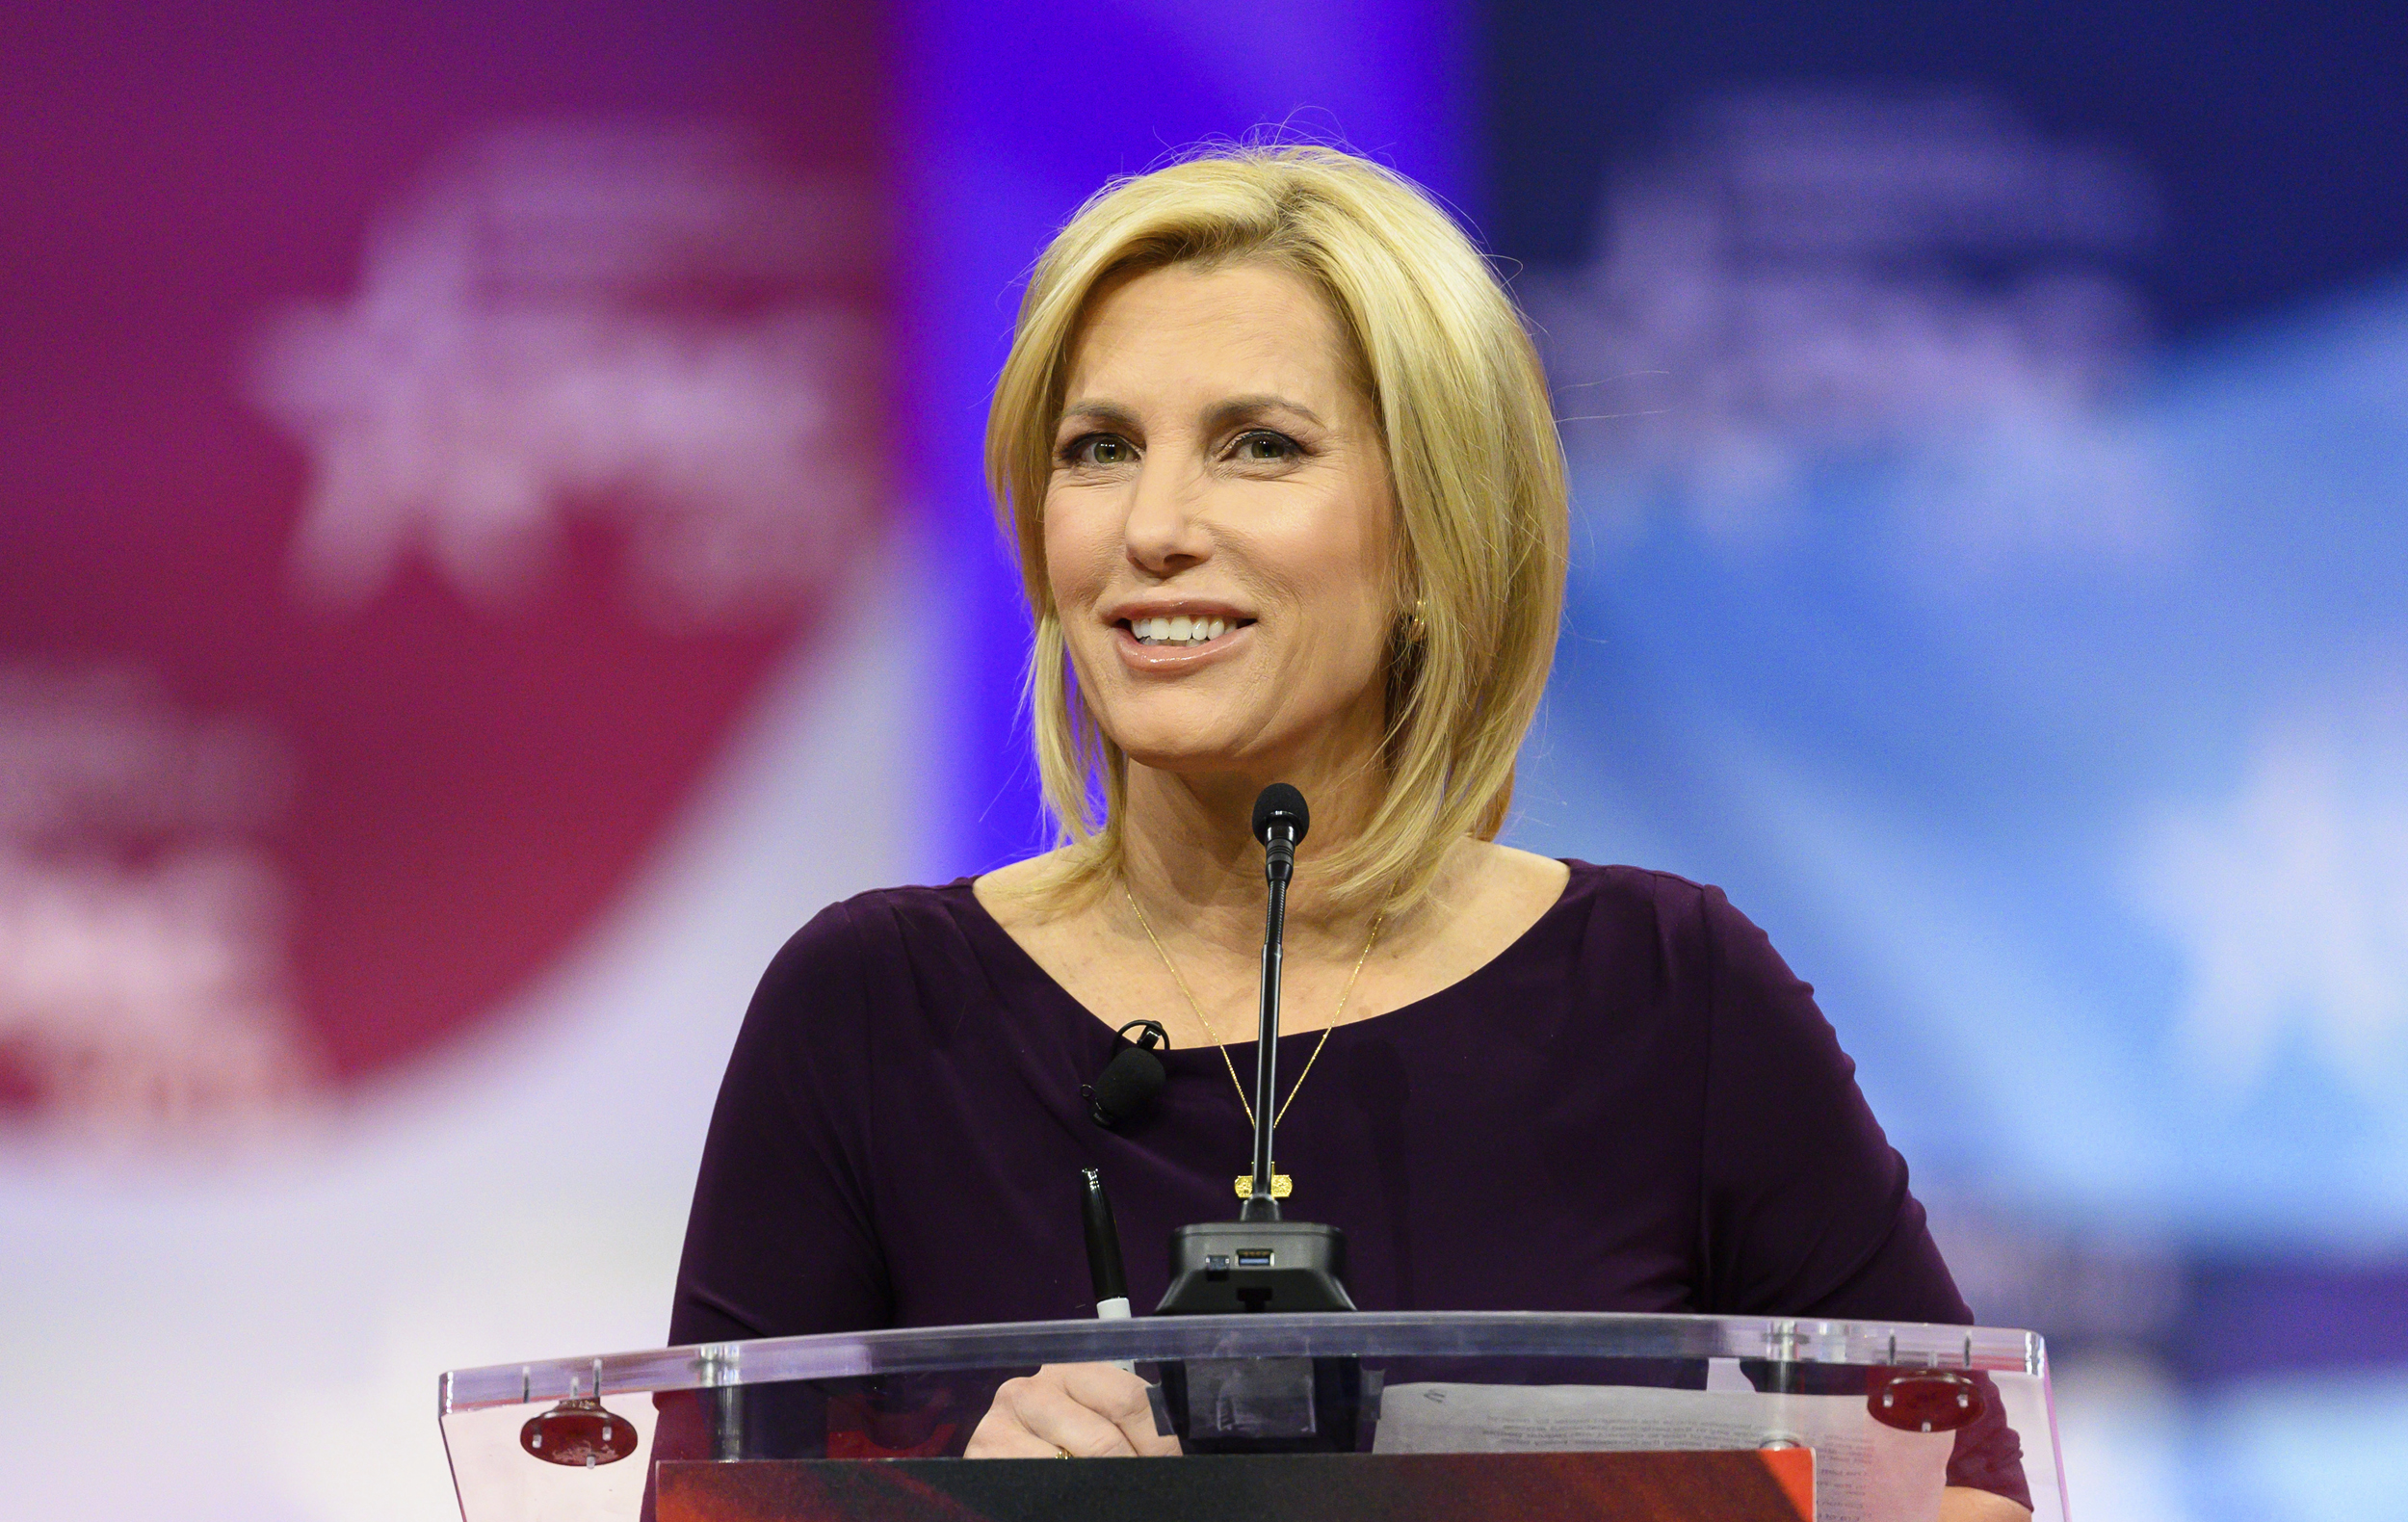 Fox News Host Laura Ingraham Muddled on air by Reference to Netflix Show 'You'